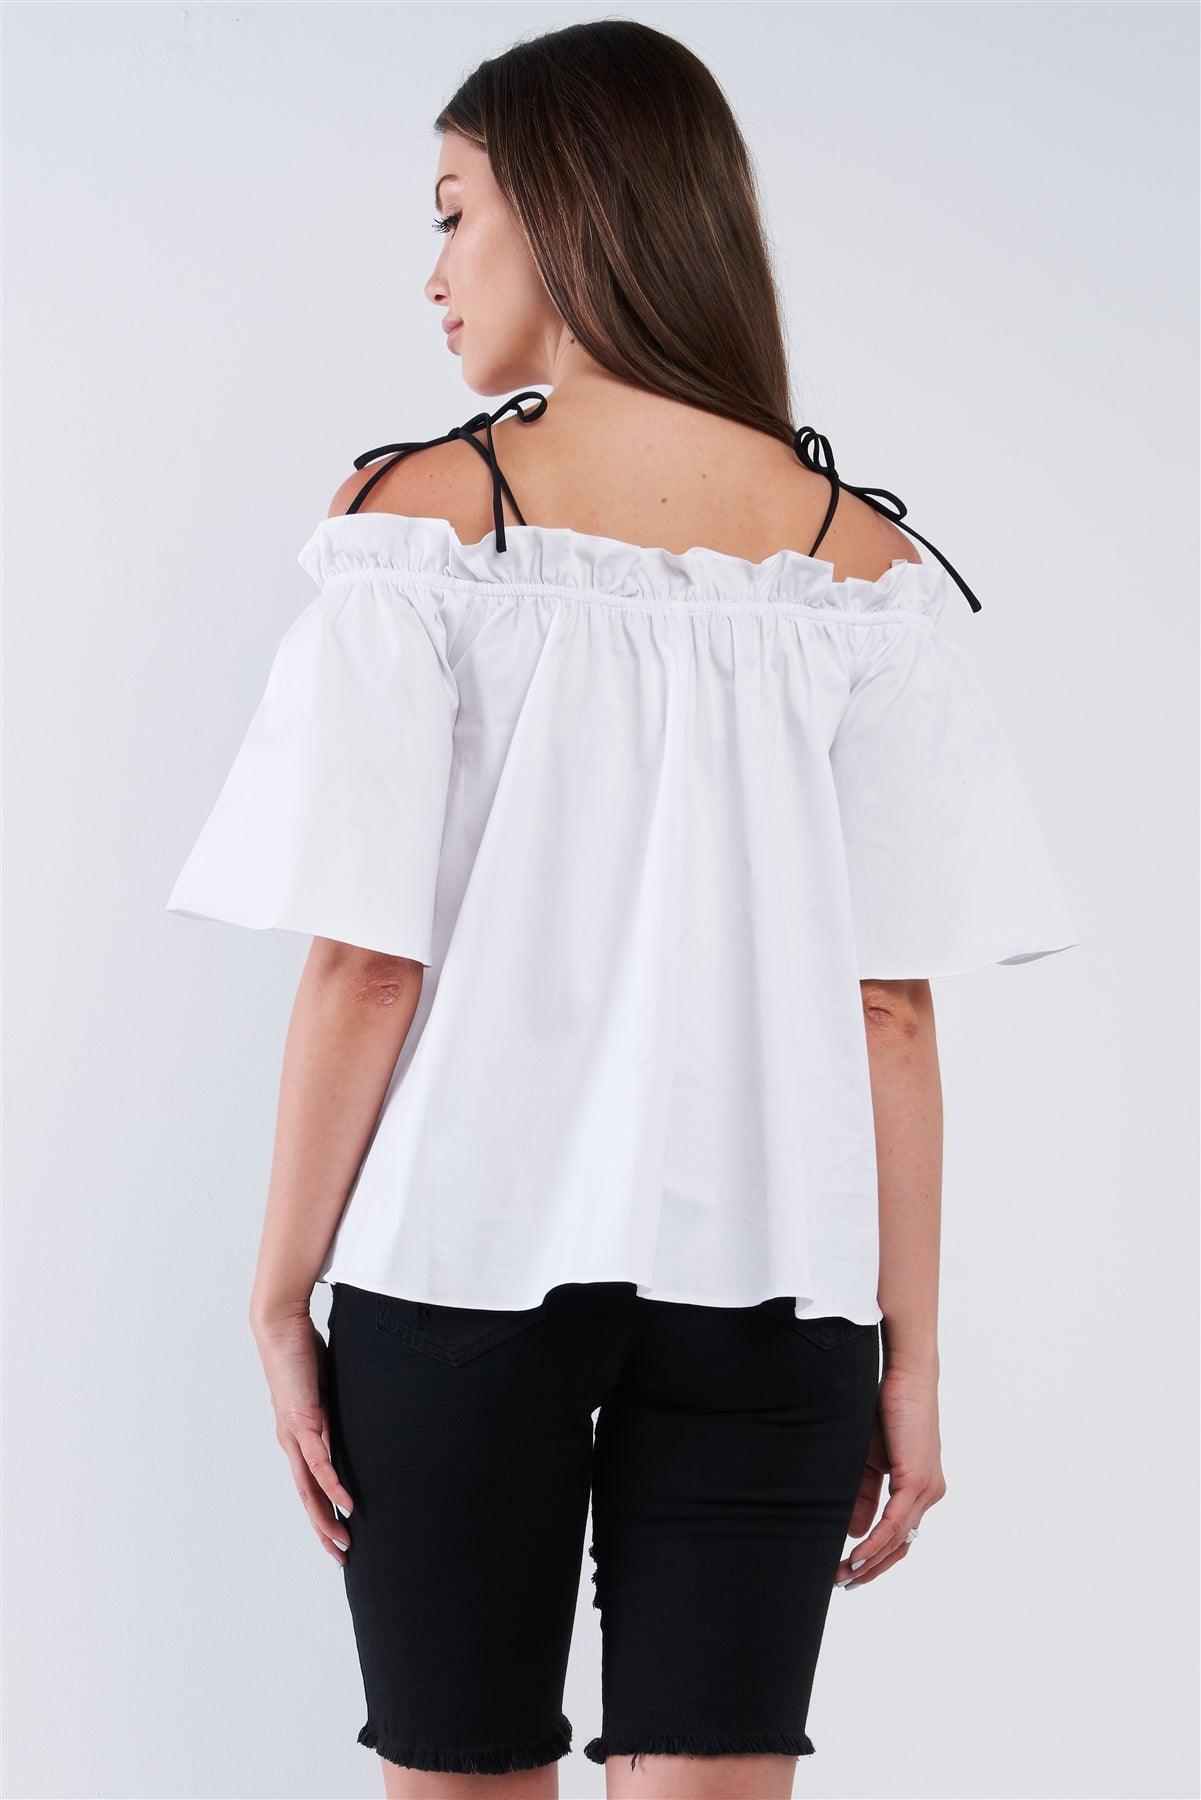 White Cotton Relaxed Fit Stretchy Ruffle Hem Off-The-Shoulder Top With Black Self Tie Strings /1-2-2-1